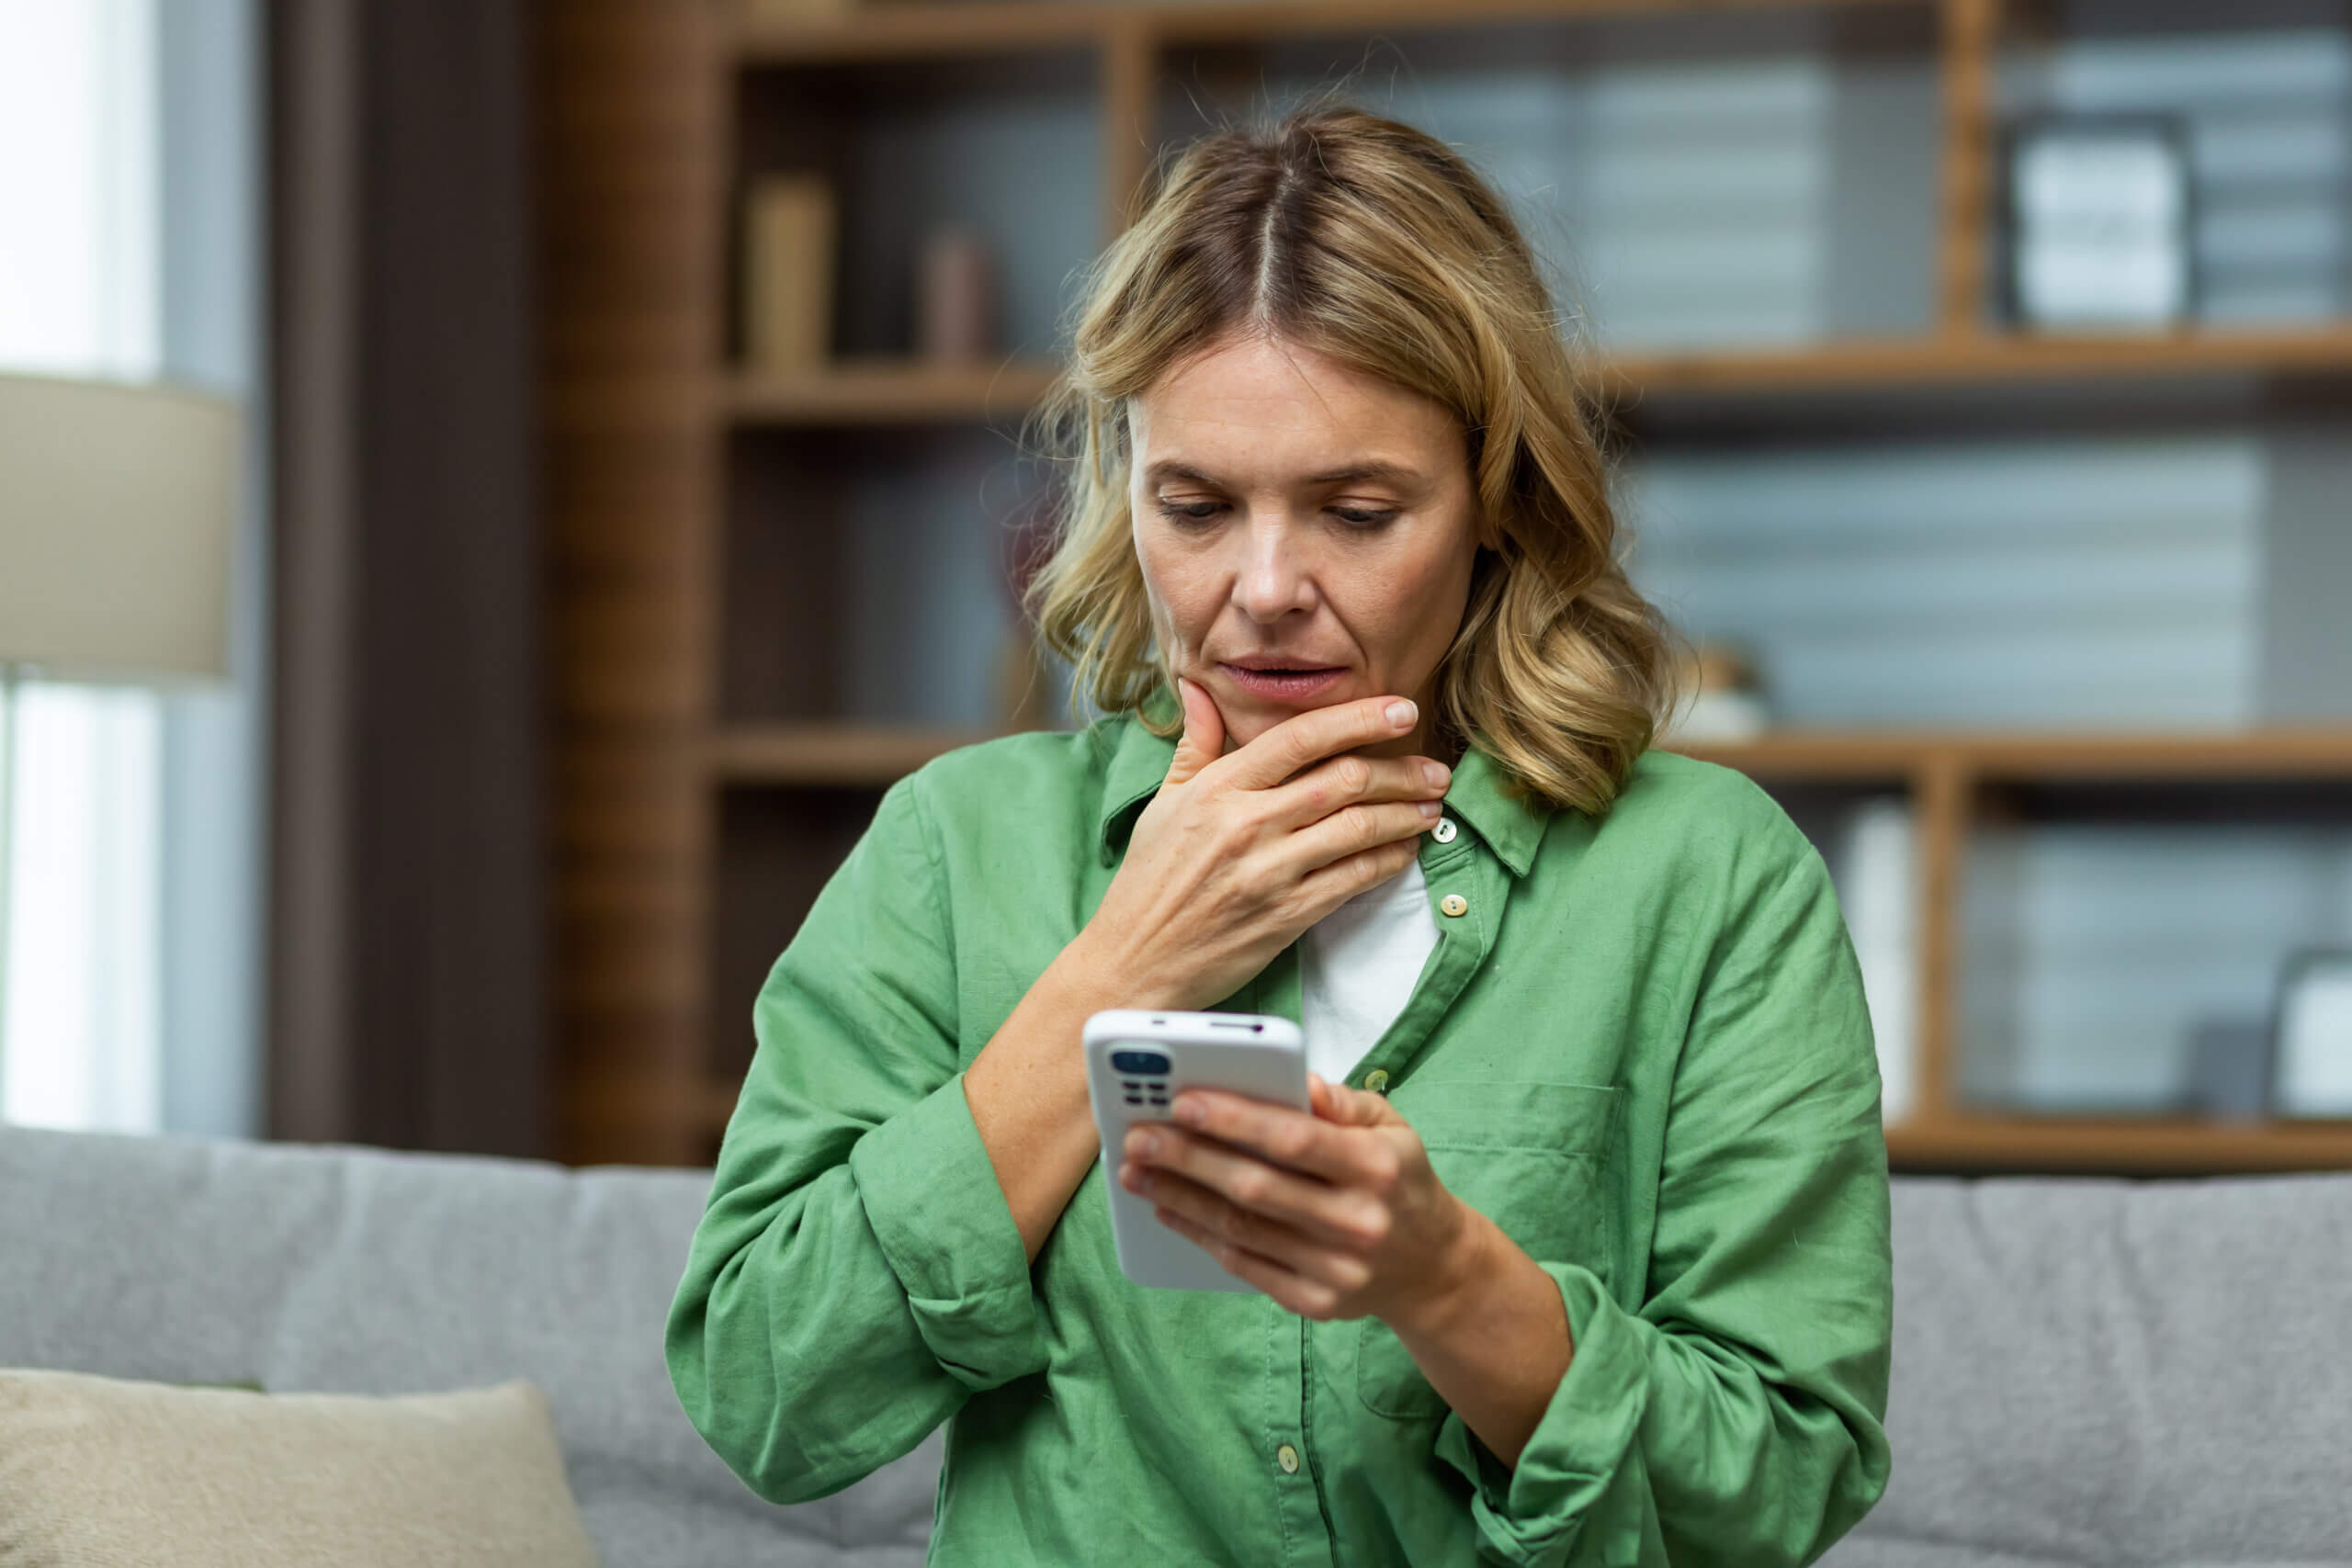 Worried woman sitting on sofa at home holding phone.